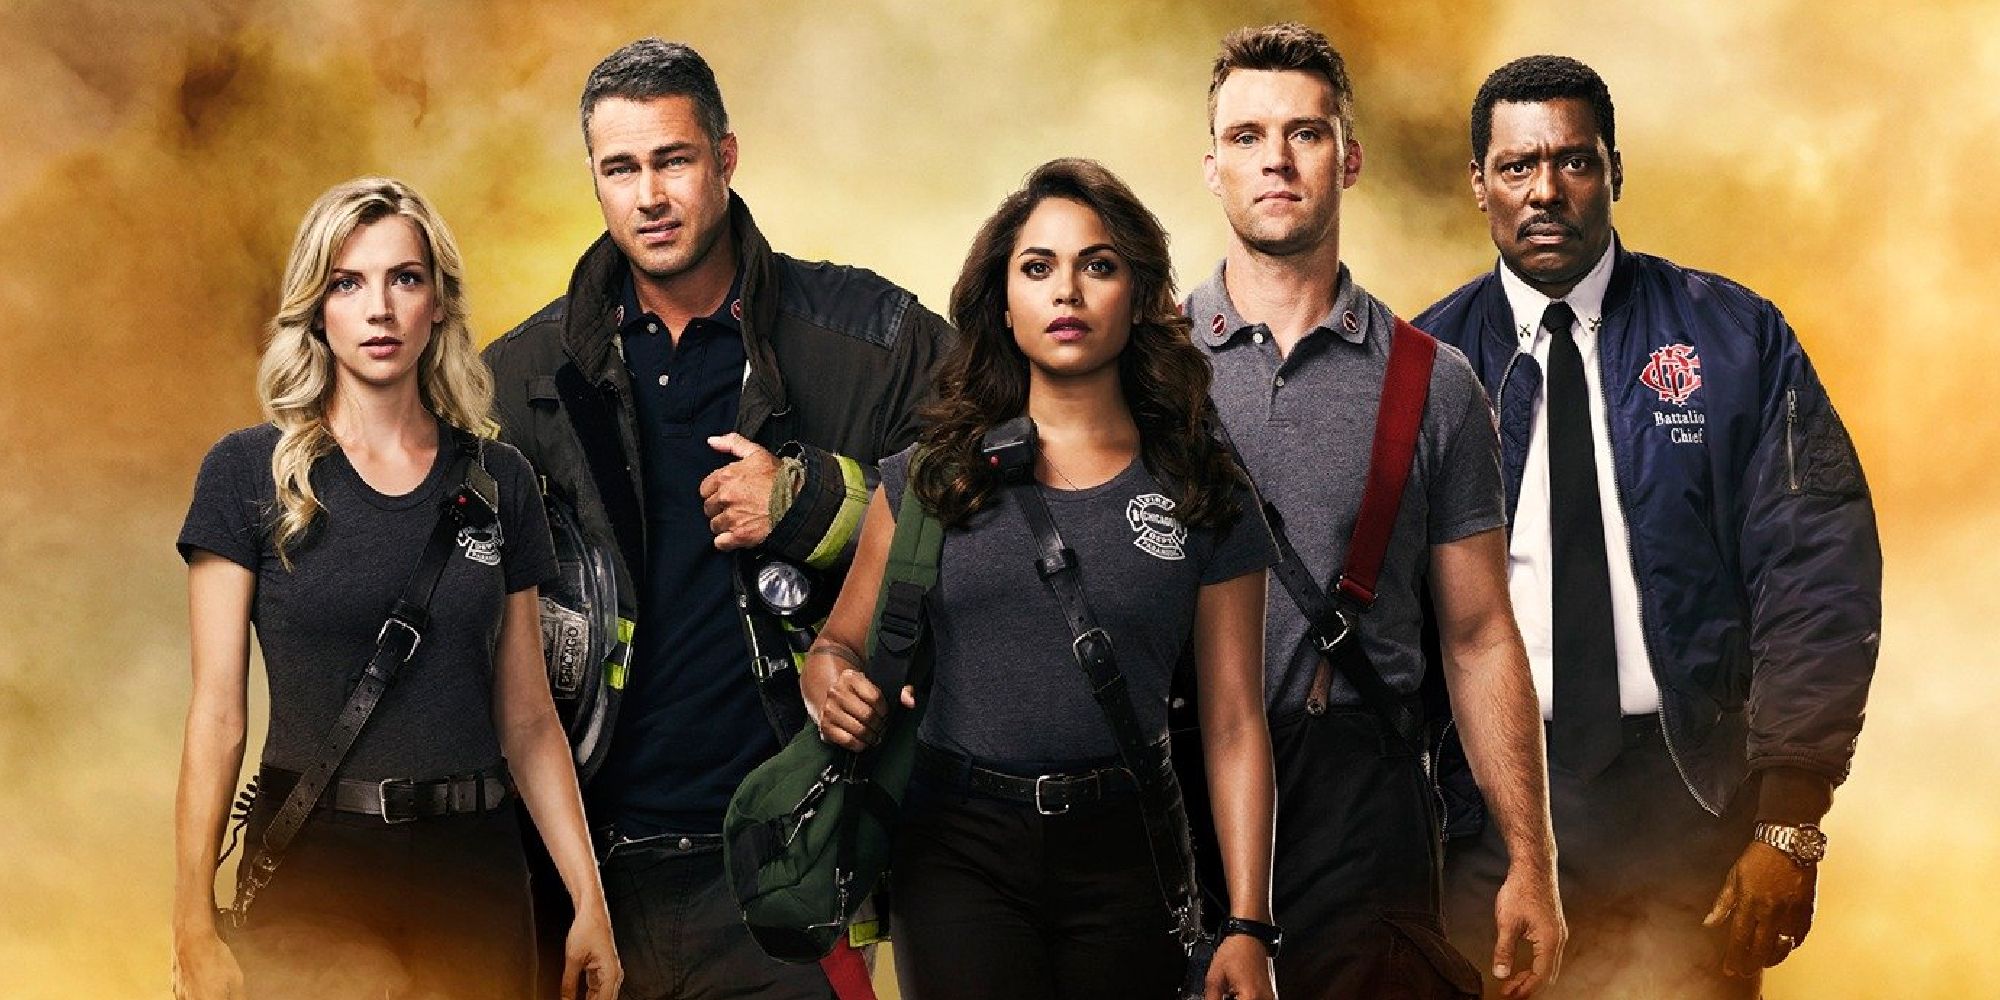 Cast photo for Season 6 of Chicago Fire